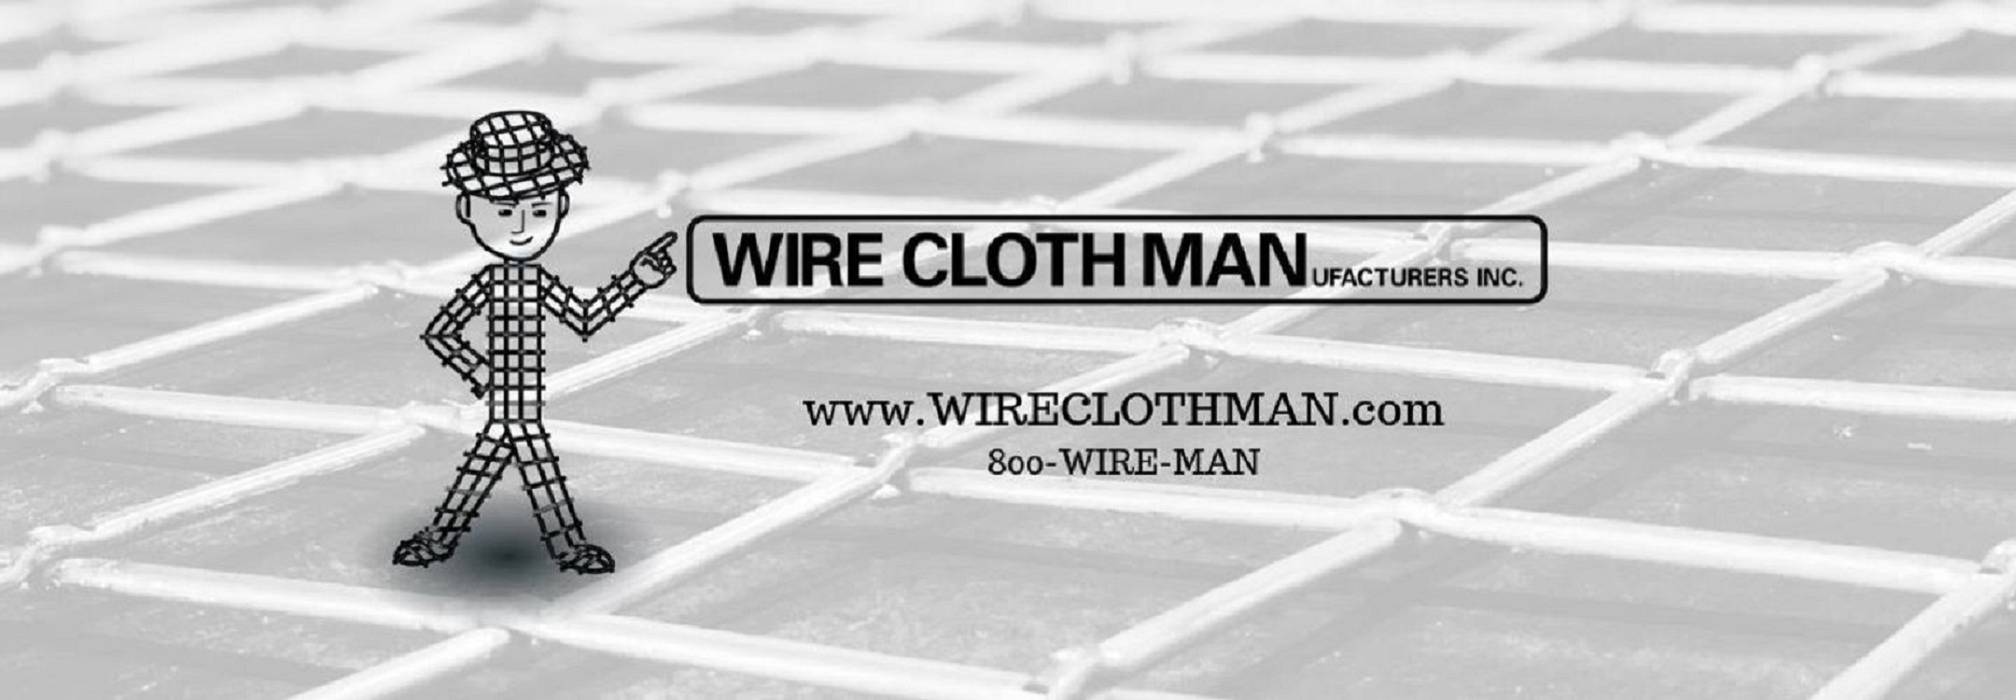 CUSTOM FABRICATION, Wire Cloth Manufacturers, Inc. Wire Cloth Manufacturers, Inc. Antejardines